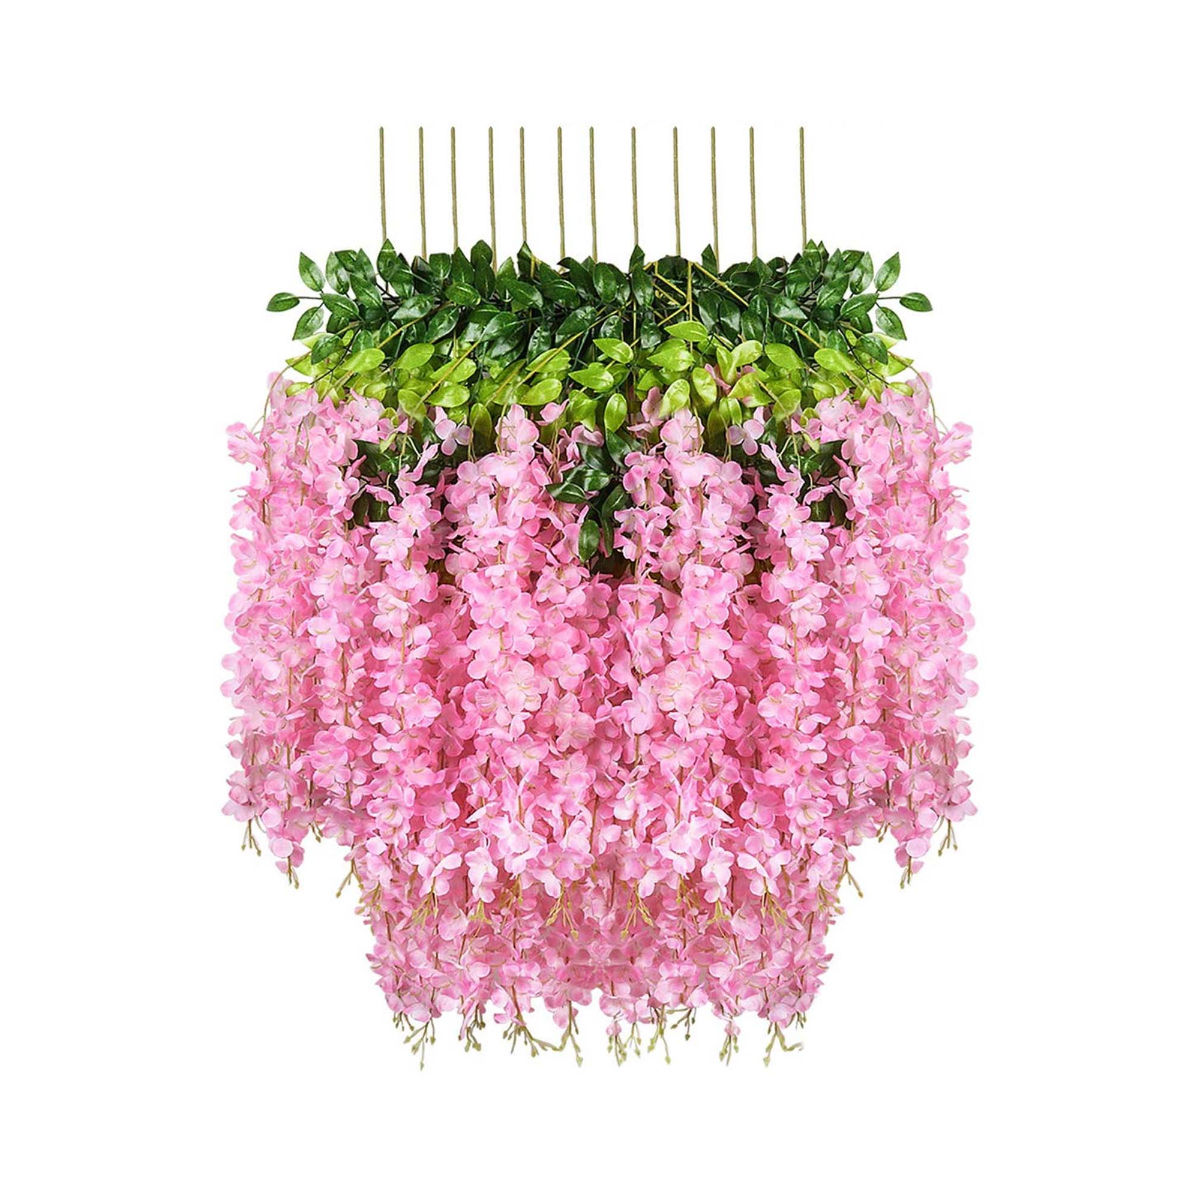 Fourwalls Artificial Beautiful Hanging Orchid Flower Vine (Set of 6, 105 cm Tall, Light-Pink)